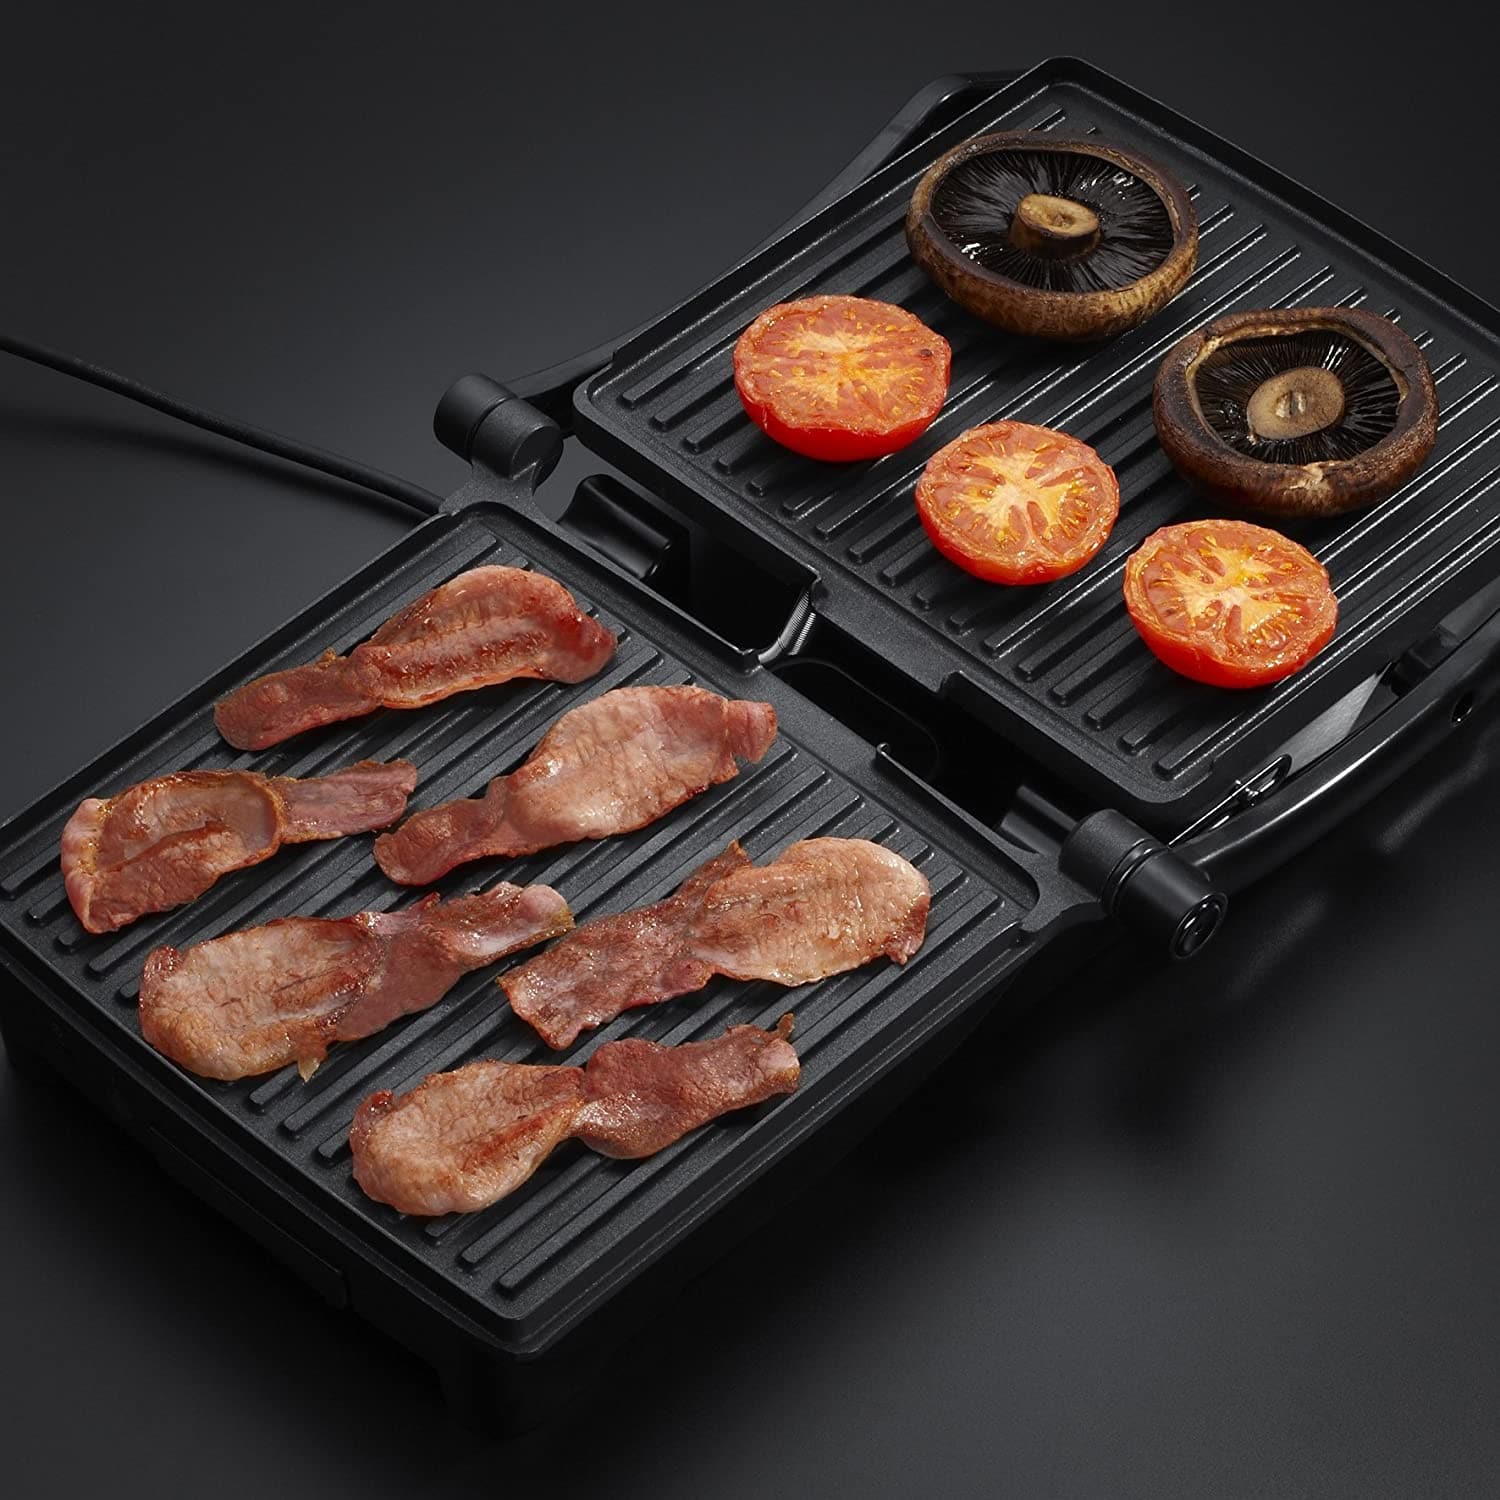 Russell Hobbs 3 IN 1 Panini Grill & Griddle-17888 - Jashanmal Home